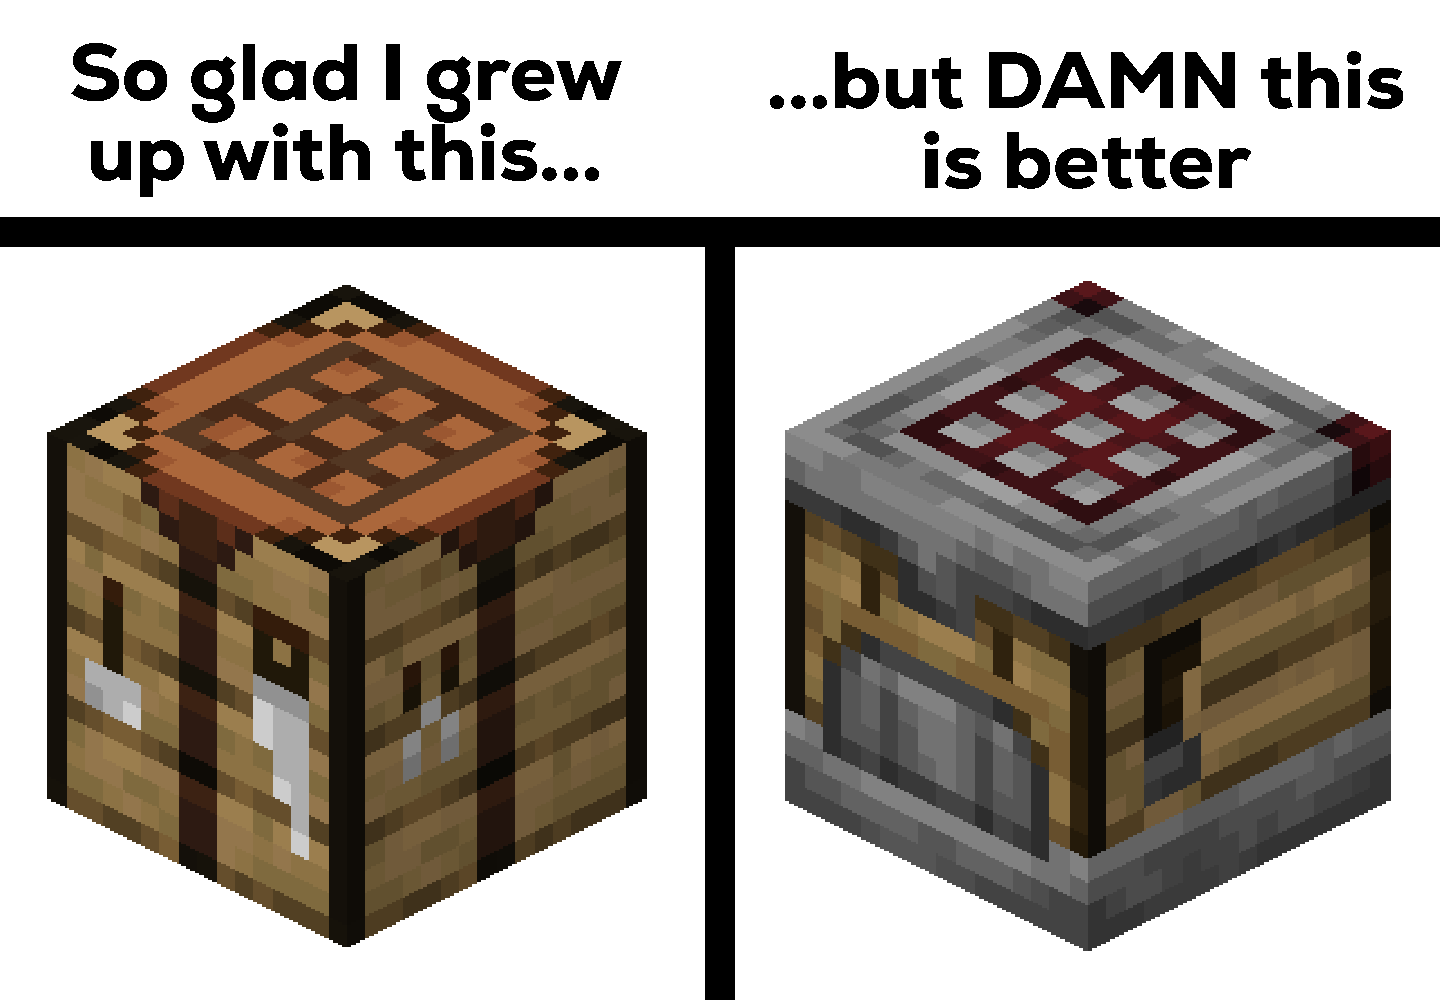 Minecraft Memes - I bet people will stop using the old crafting table after this.